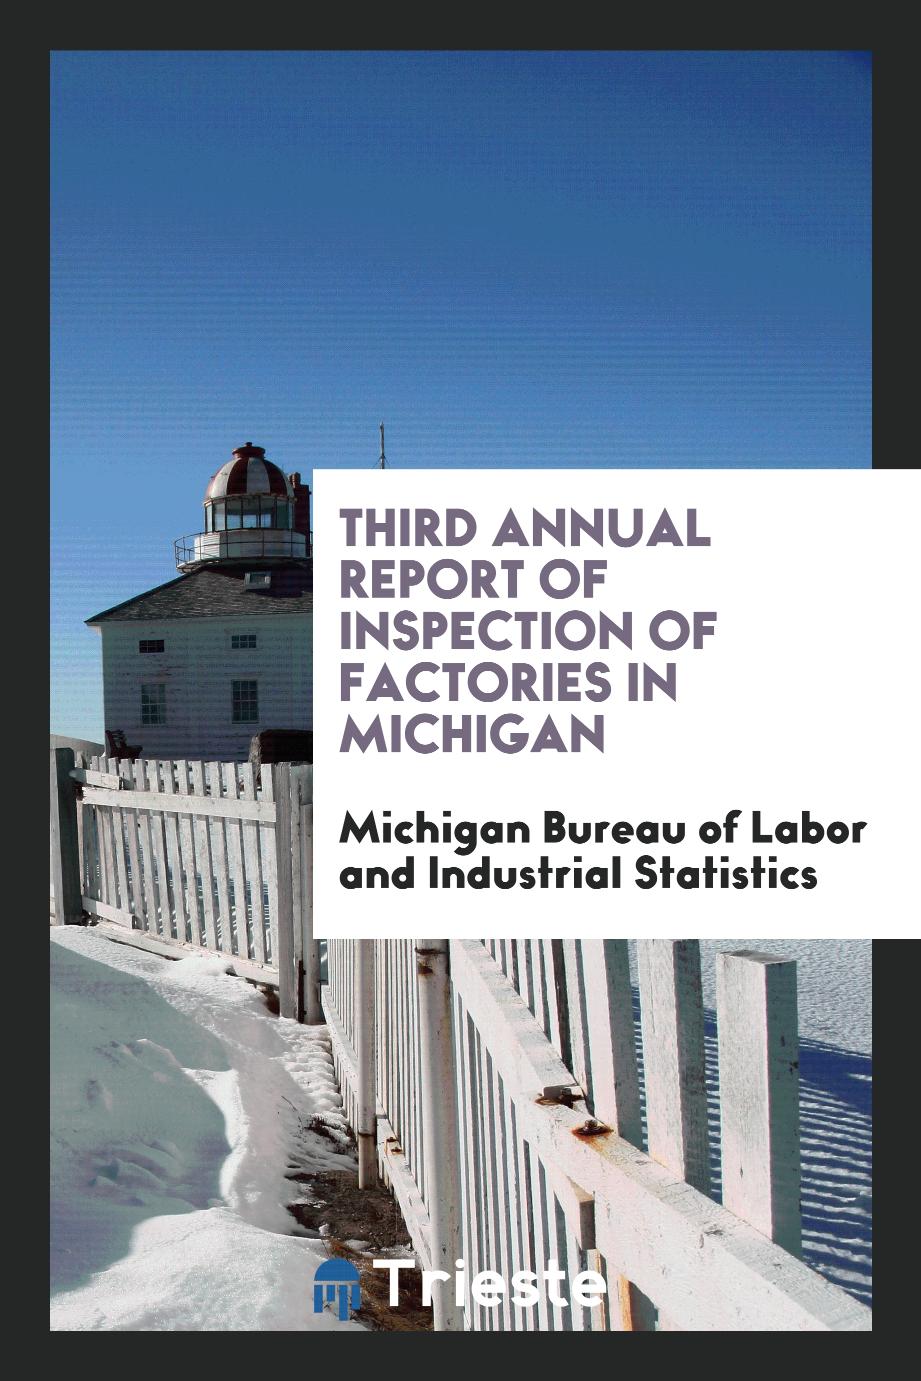 Third Annual Report of Inspection of Factories in Michigan